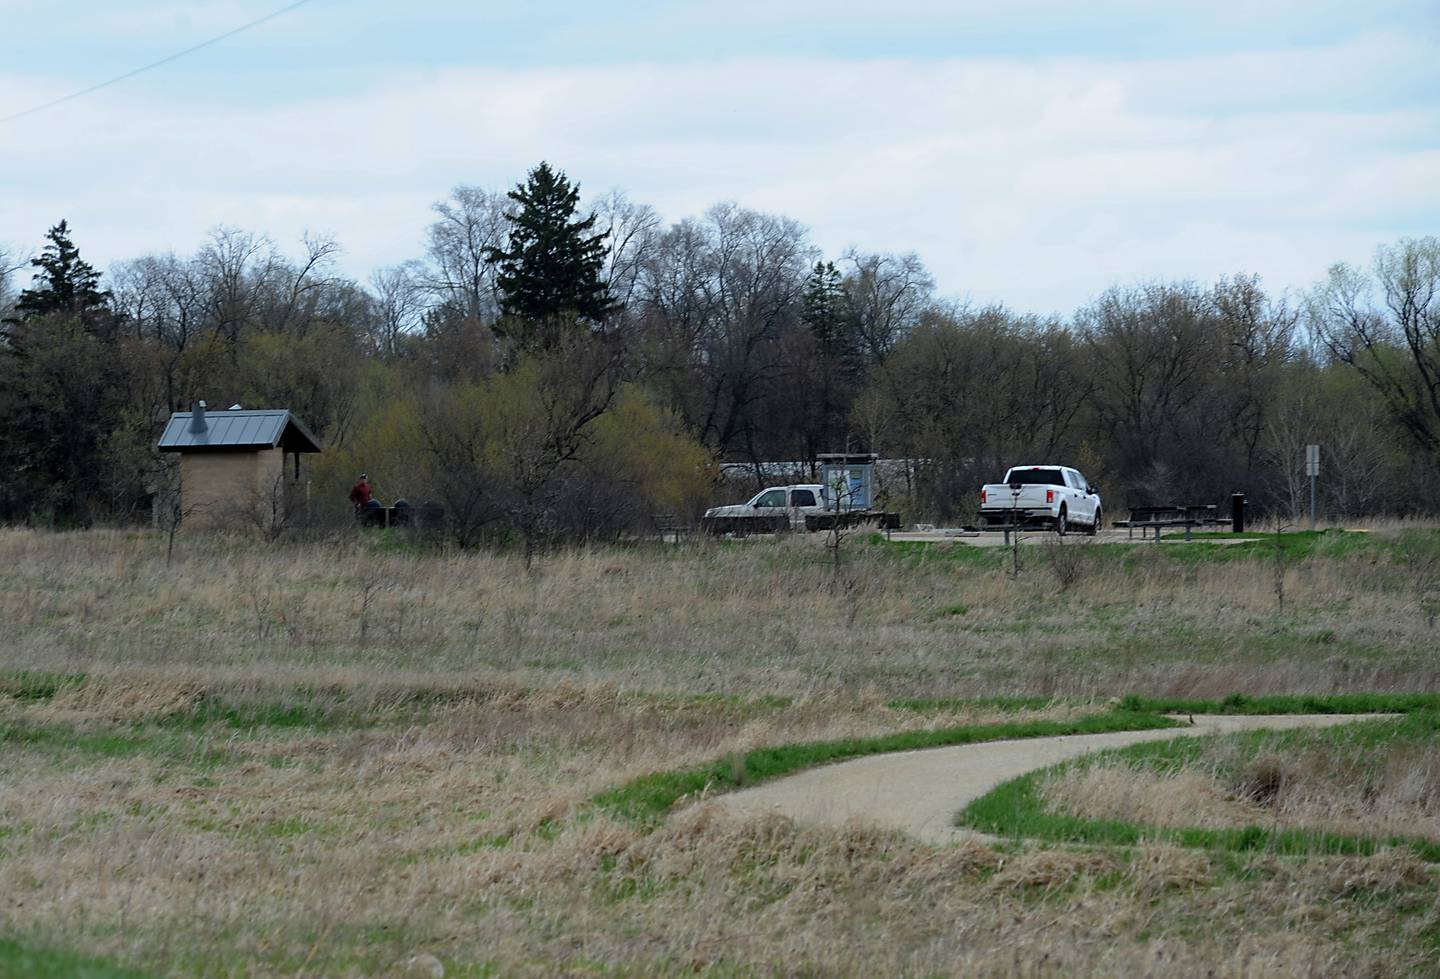 The McHenry County Conservation District’s North Branch Conservation Area at 11500 North Keystone Road in Richmond on Monday, May 2, 2022. A body was found near the entrance to the conservation area on Friday.